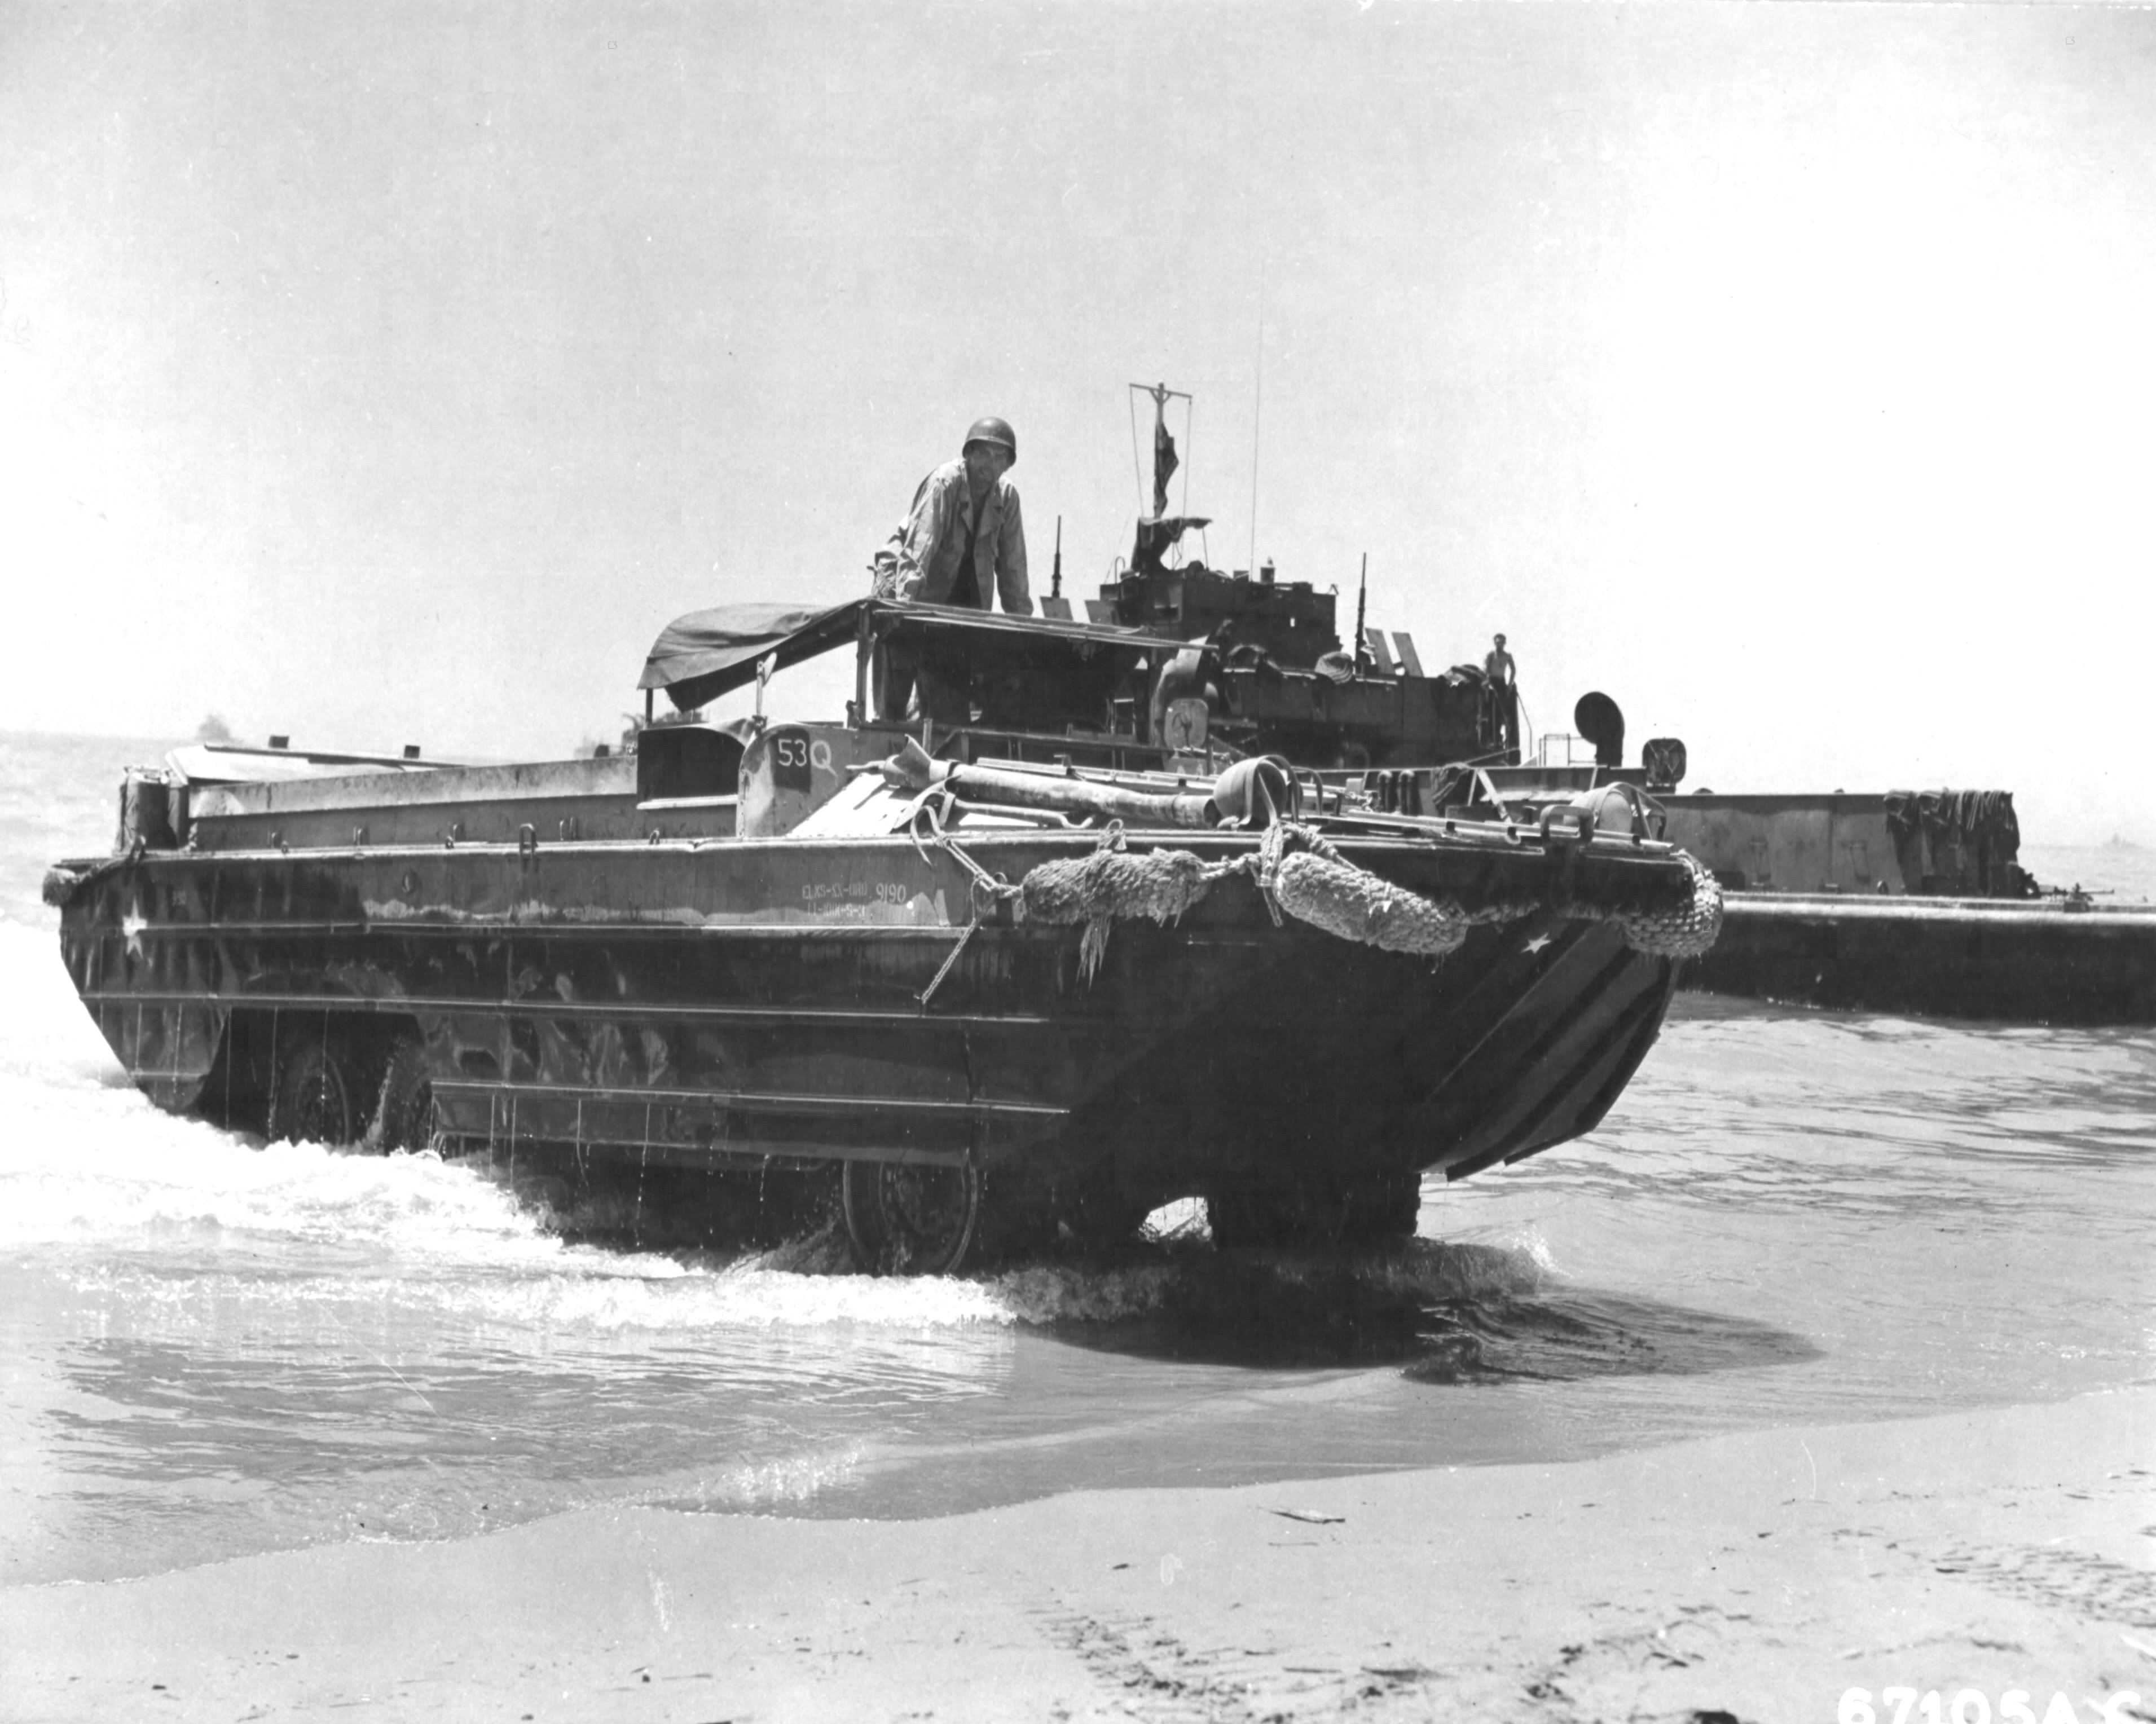 US Army DUKW loaded with oil drums coming ashore at Gela, Sicily, Italy, Jul 1943